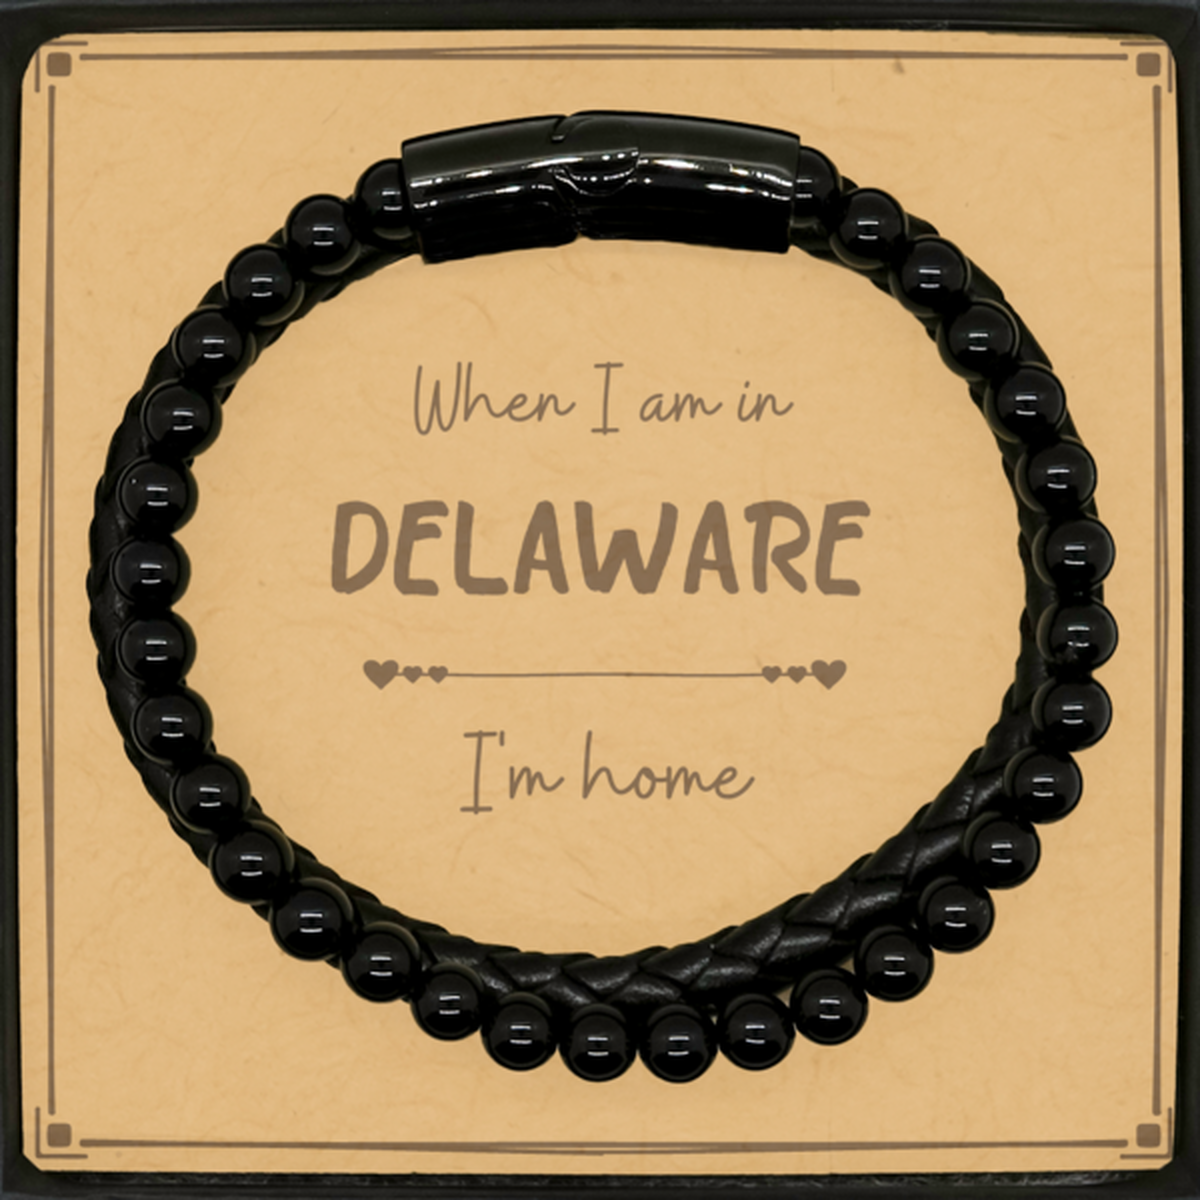 When I am in Delaware I'm home Stone Leather Bracelets, Message Card Gifts For Delaware, State Delaware Birthday Gifts for Friends Coworker